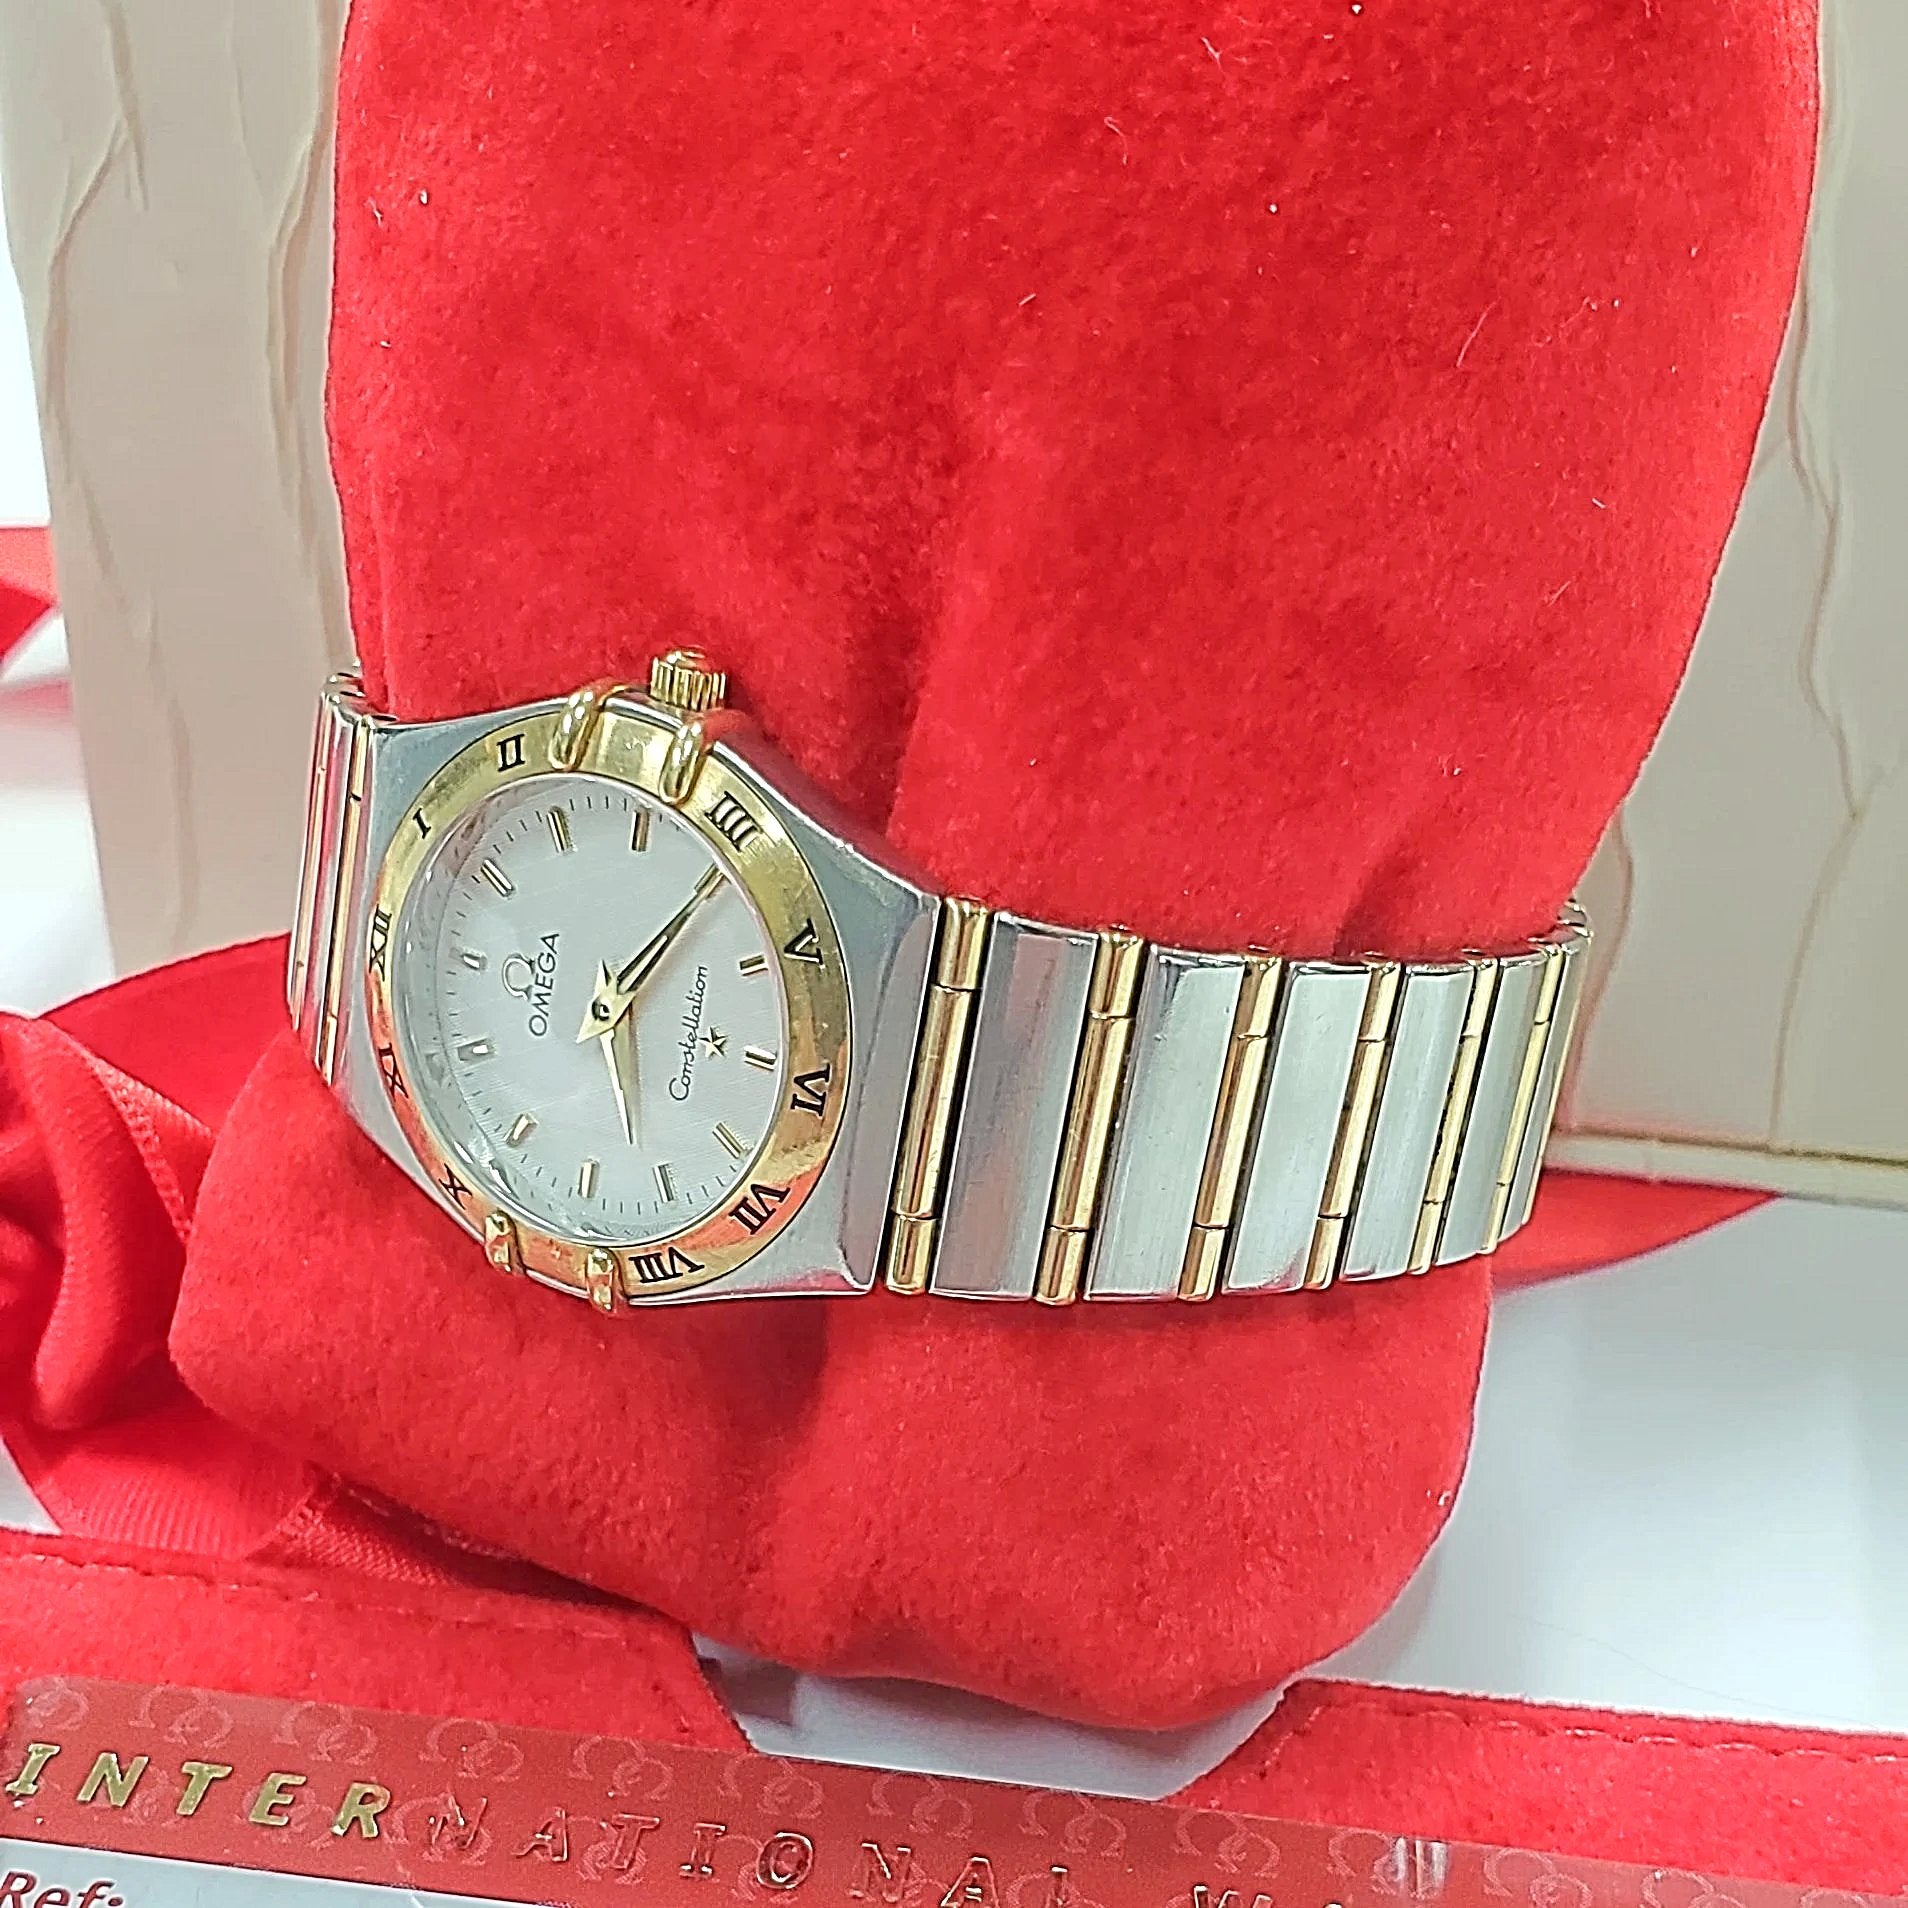 Ladies Omega Constellation 28mm Two Tone Watch with Quartz Movement, Omega Calibre 4061 and White Dial. (Pre-Owned)